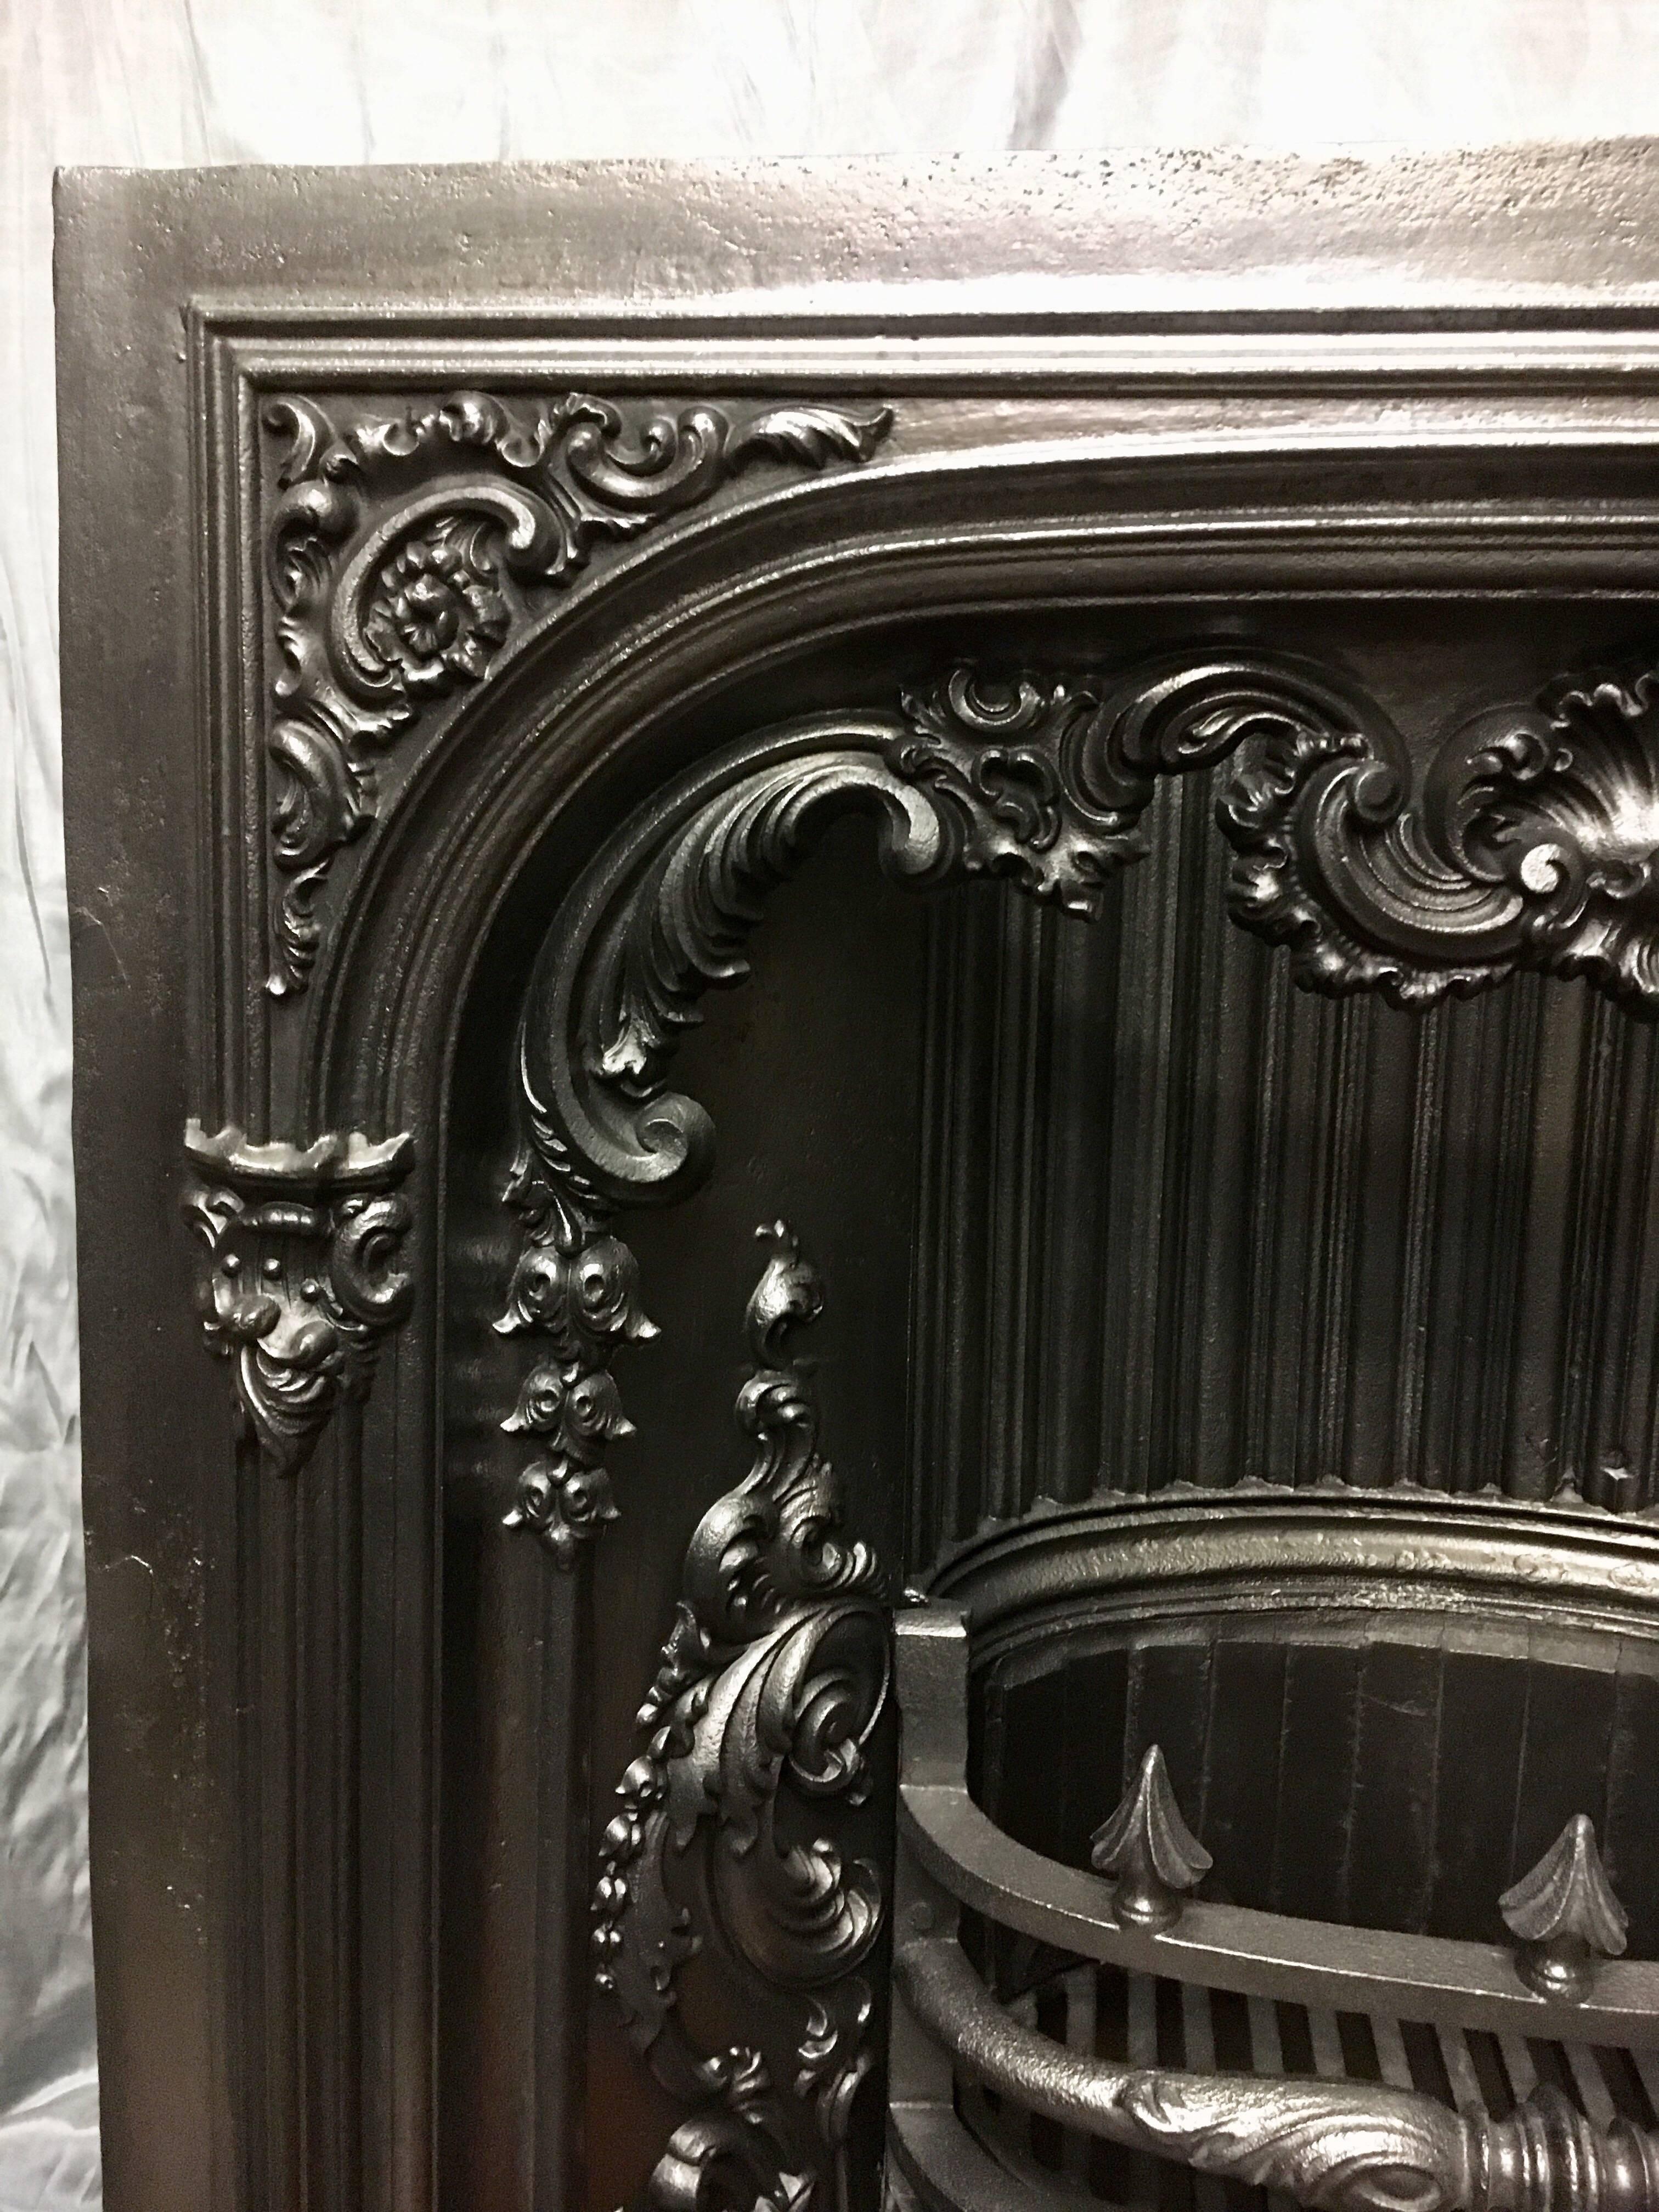 A fully refurbished 19th century Victorian cast iron fireplace insert cast by the Carron foundry in 1840, we also have a set of slate surround slips that fit over the opening flange to accommodate larger fireplace openings. (Optional).

English,